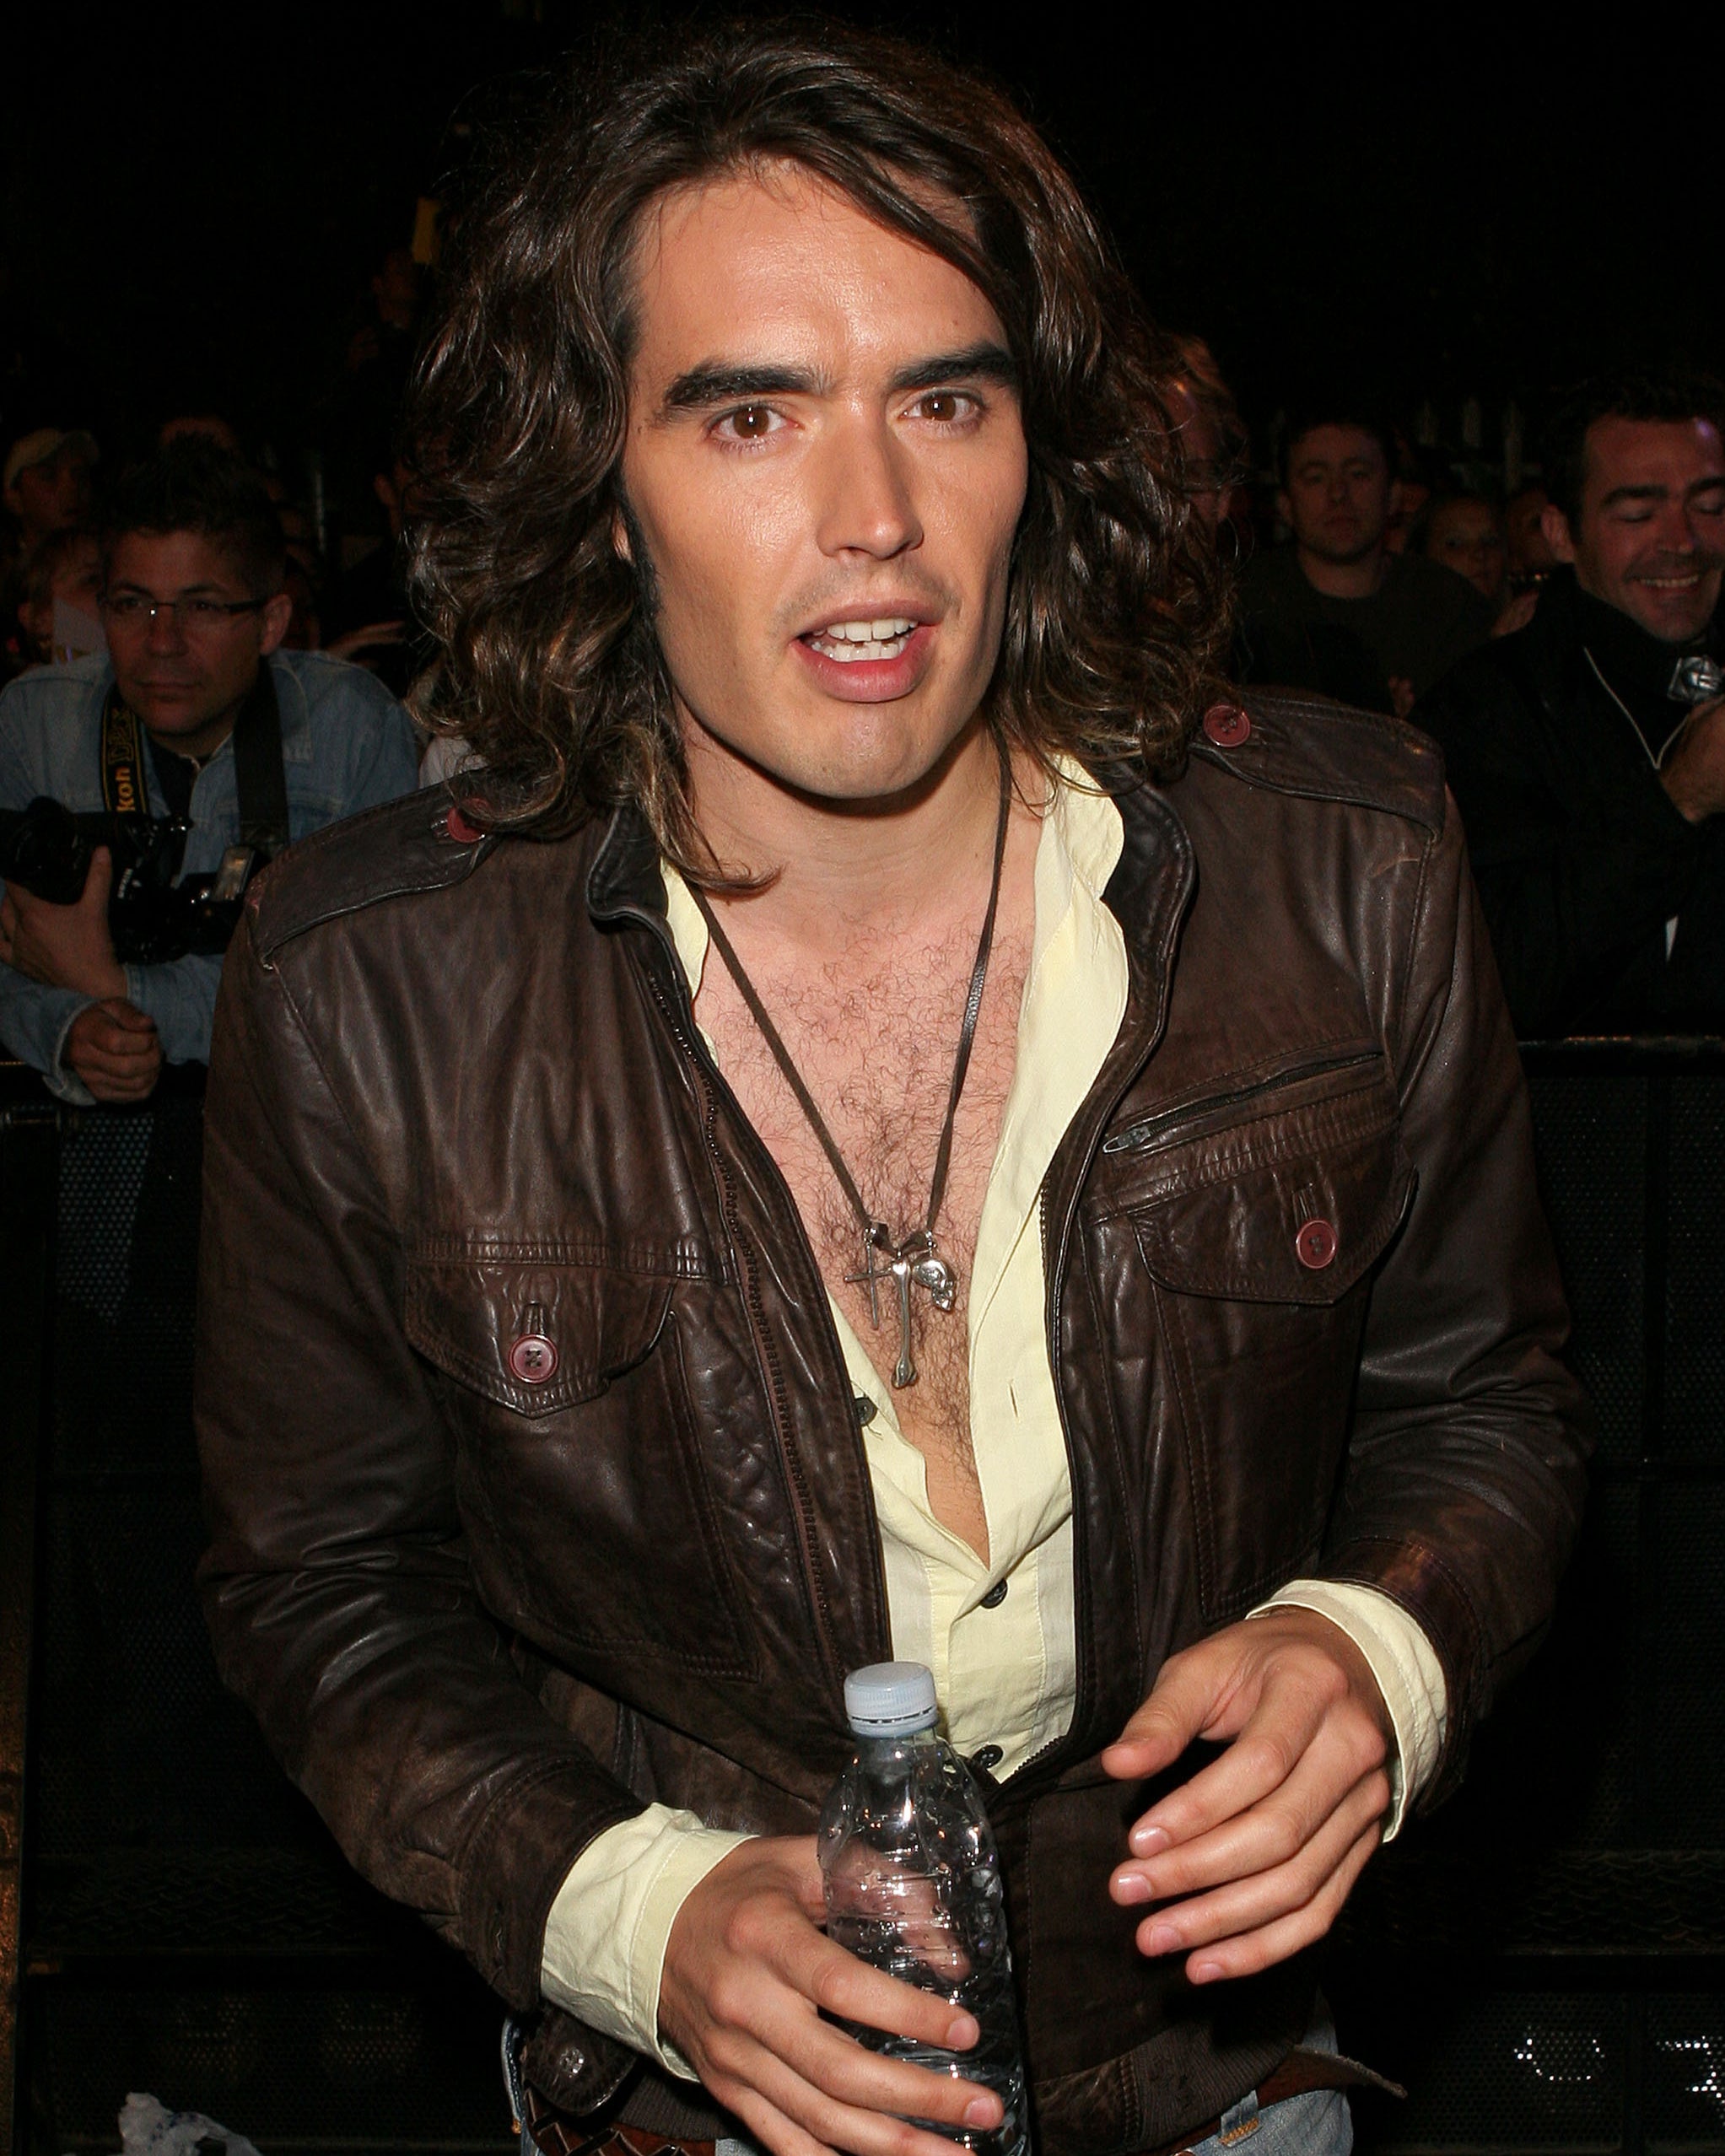 Closeup of Russell Brand at an event holding a bottle of water